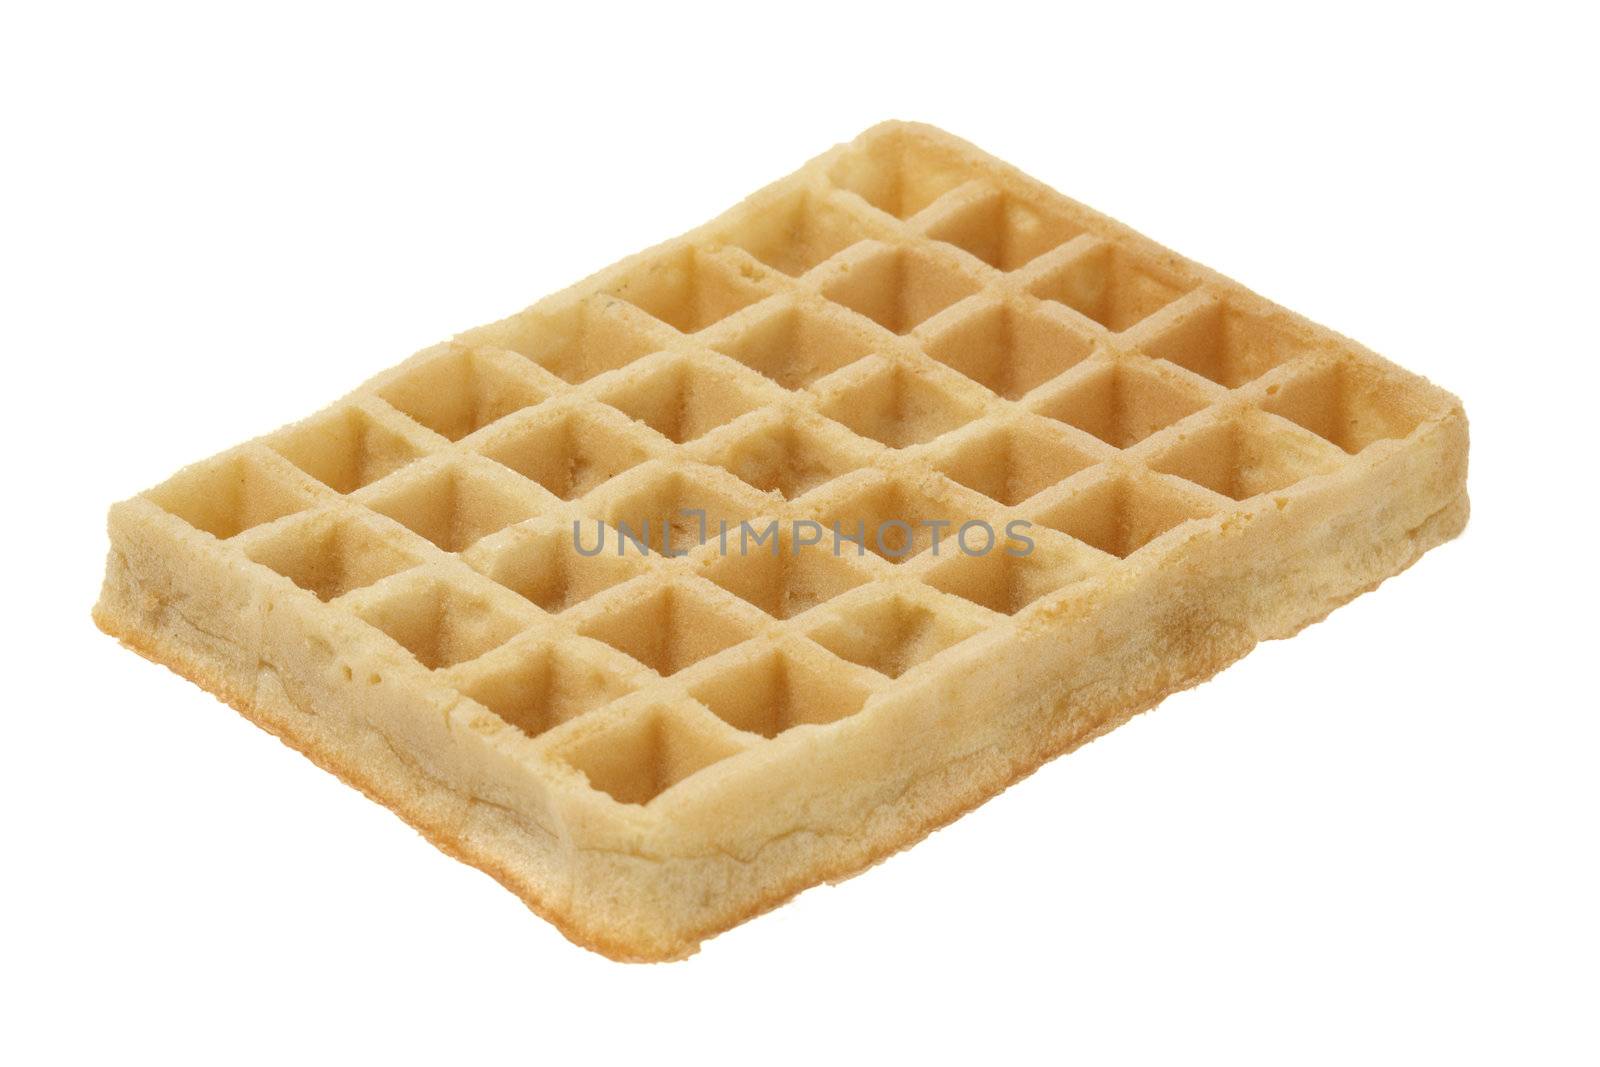 A Waffle isolated over white